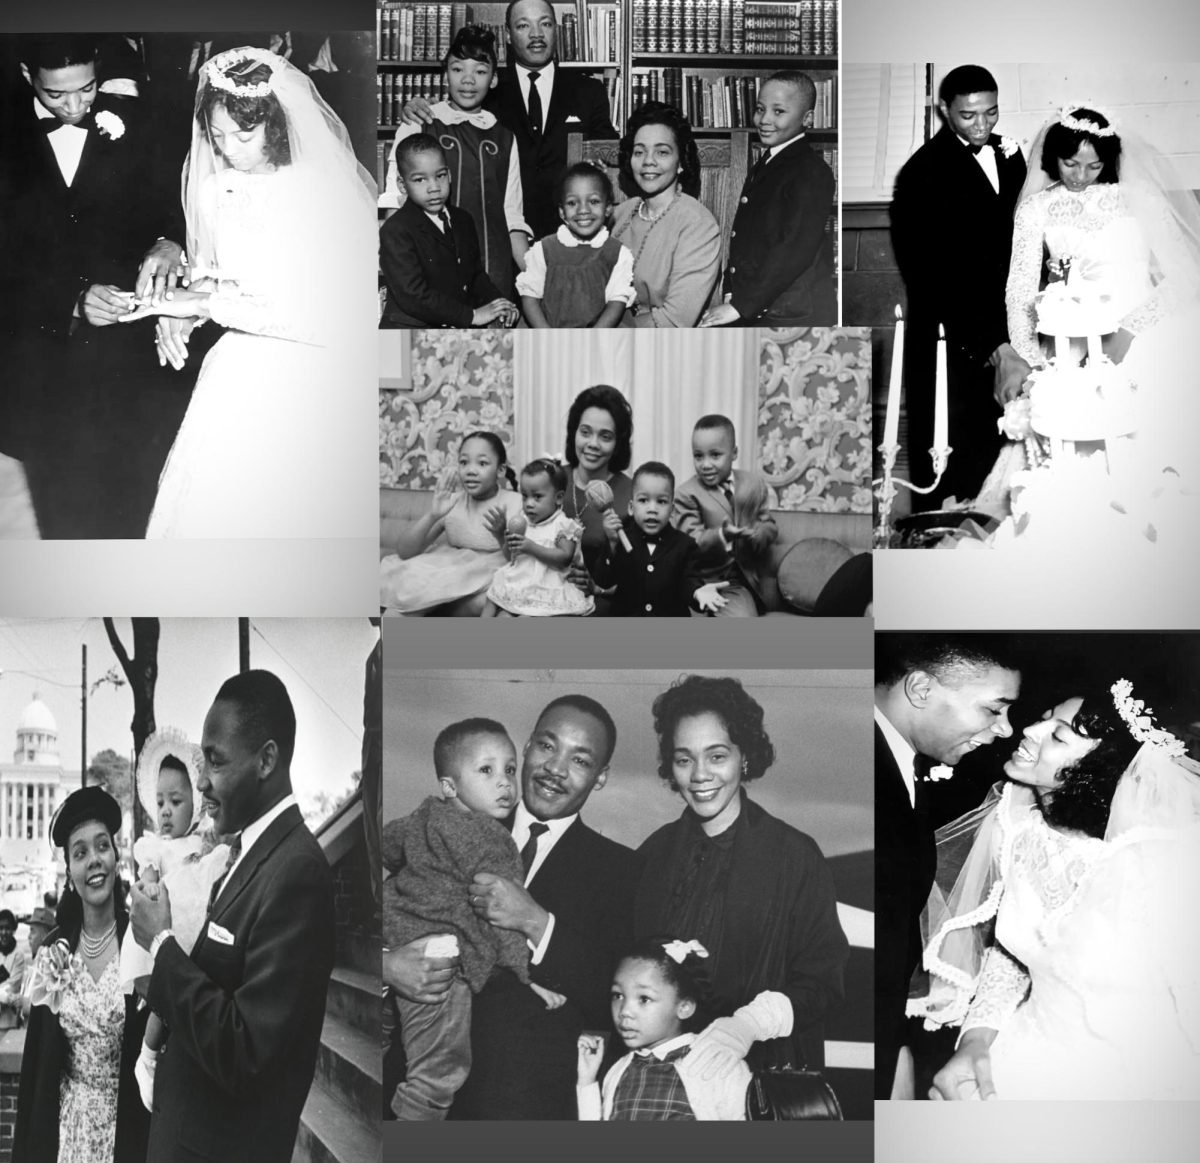 This collage illustrates a sampling of photos of Dr. Martin Luther King, Jr. and his family.